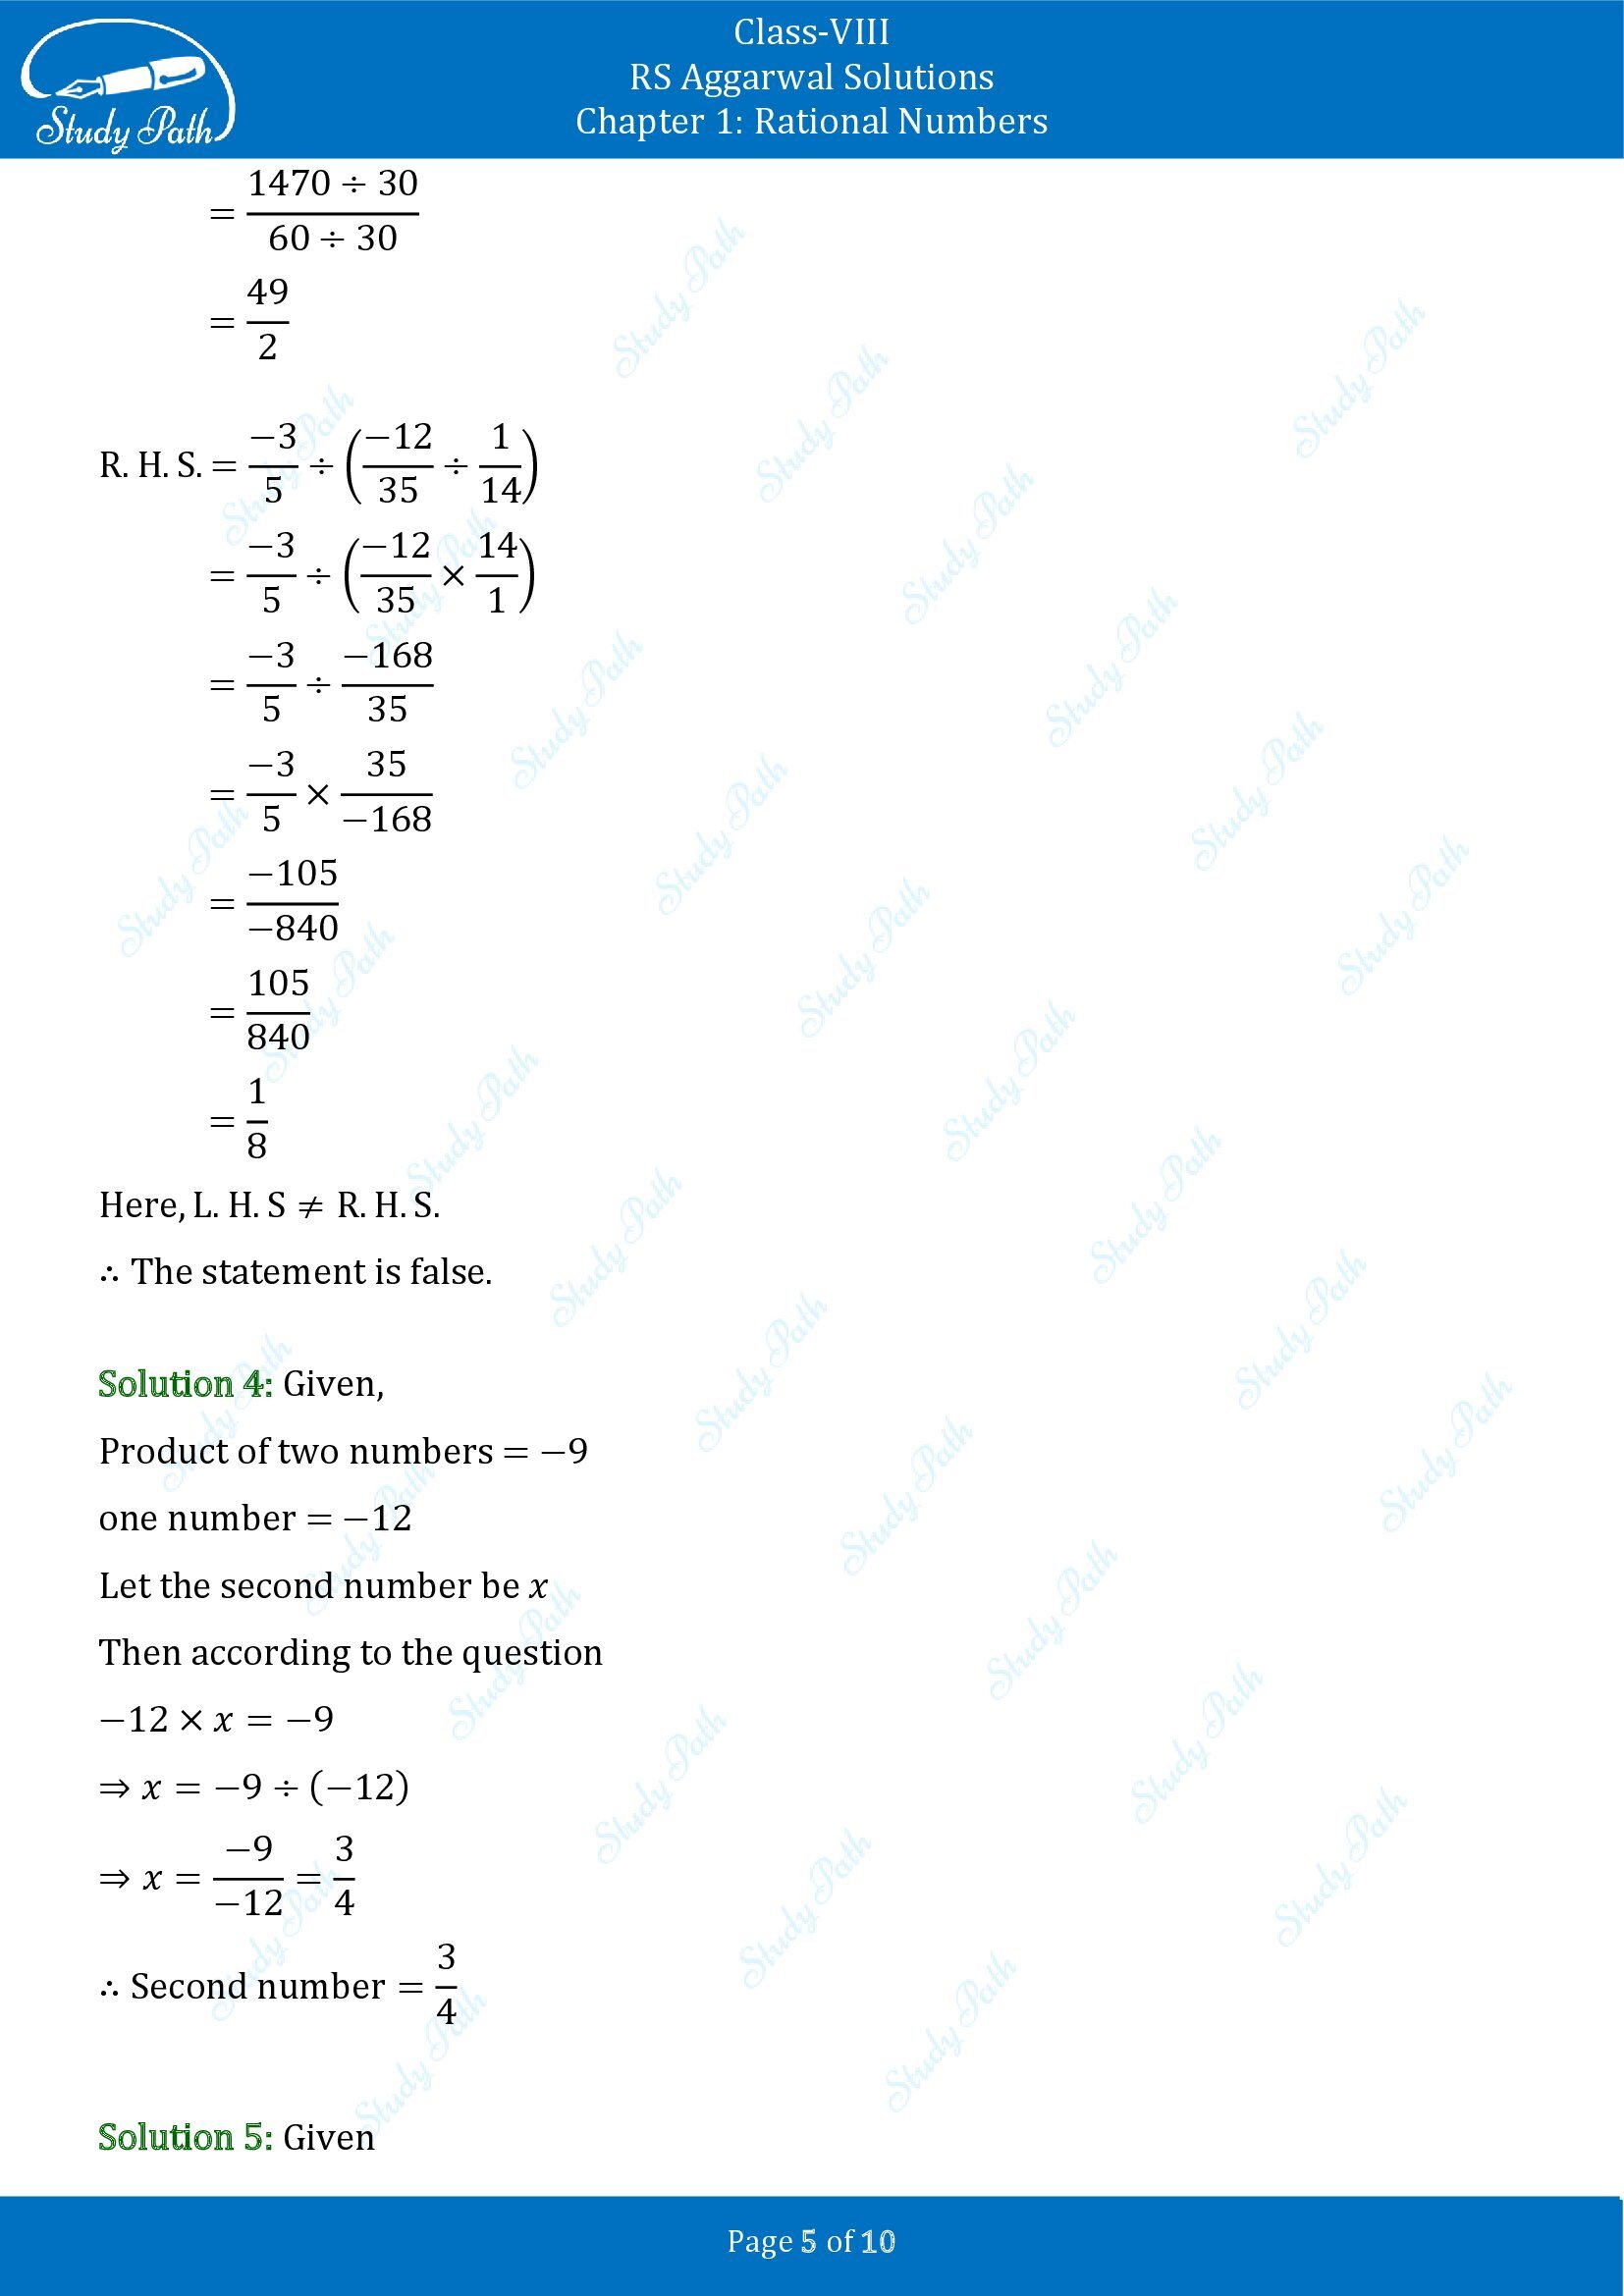 RS Aggarwal Solutions Class 8 Chapter 1 Rational Numbers Exercise 1E 00005